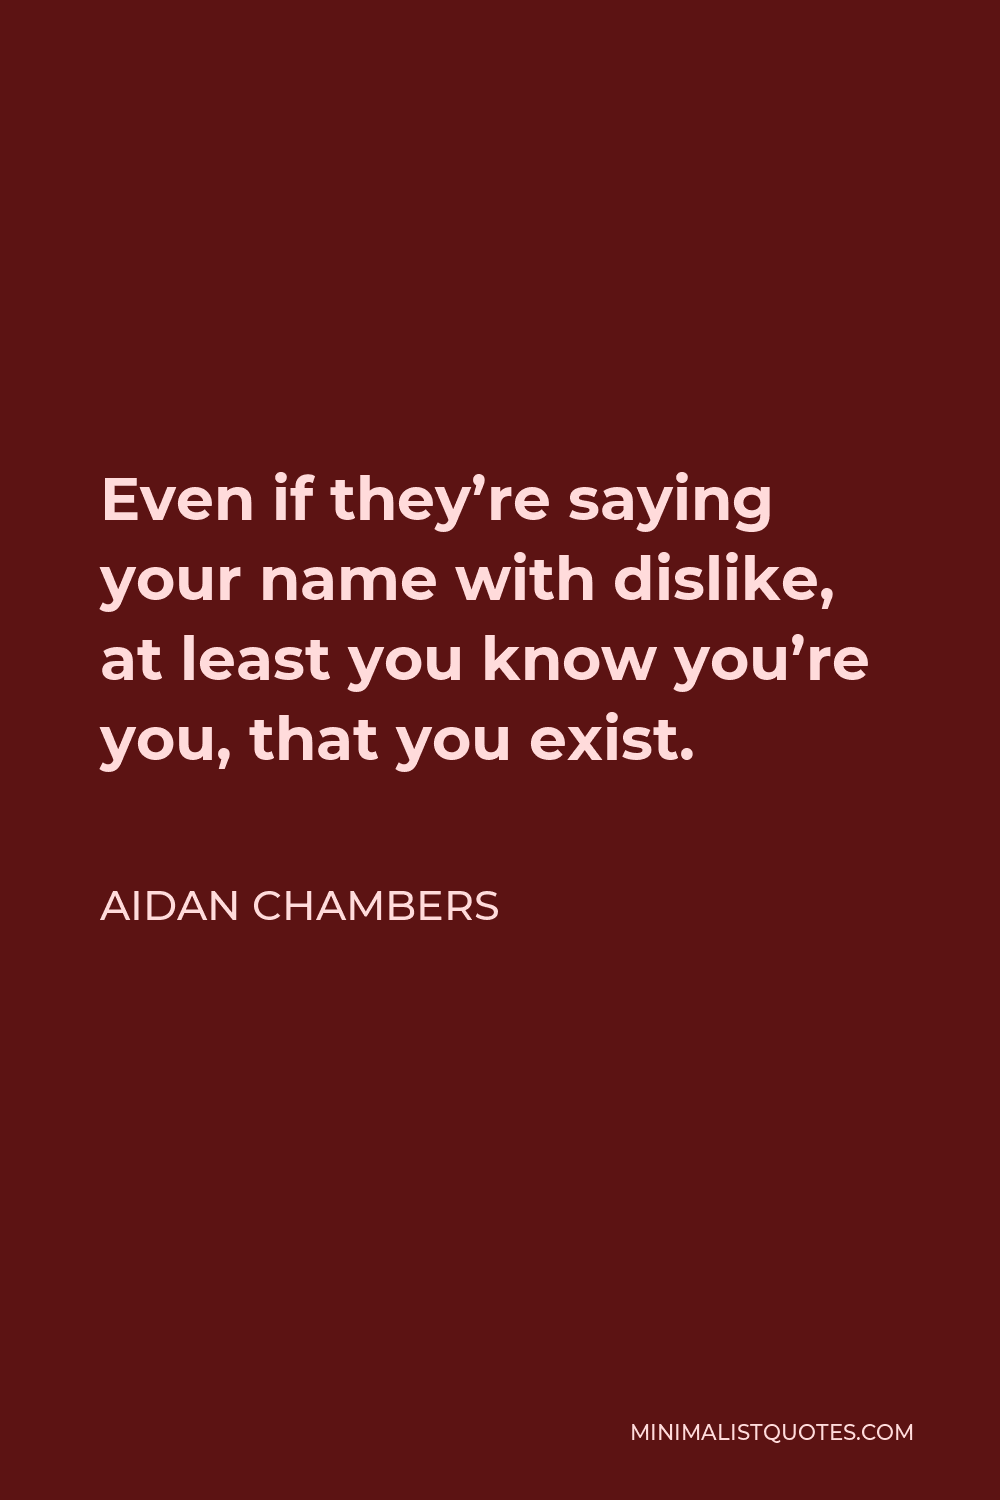 Aidan Chambers Quote - Even if they’re saying your name with dislike, at least you know you’re you, that you exist.